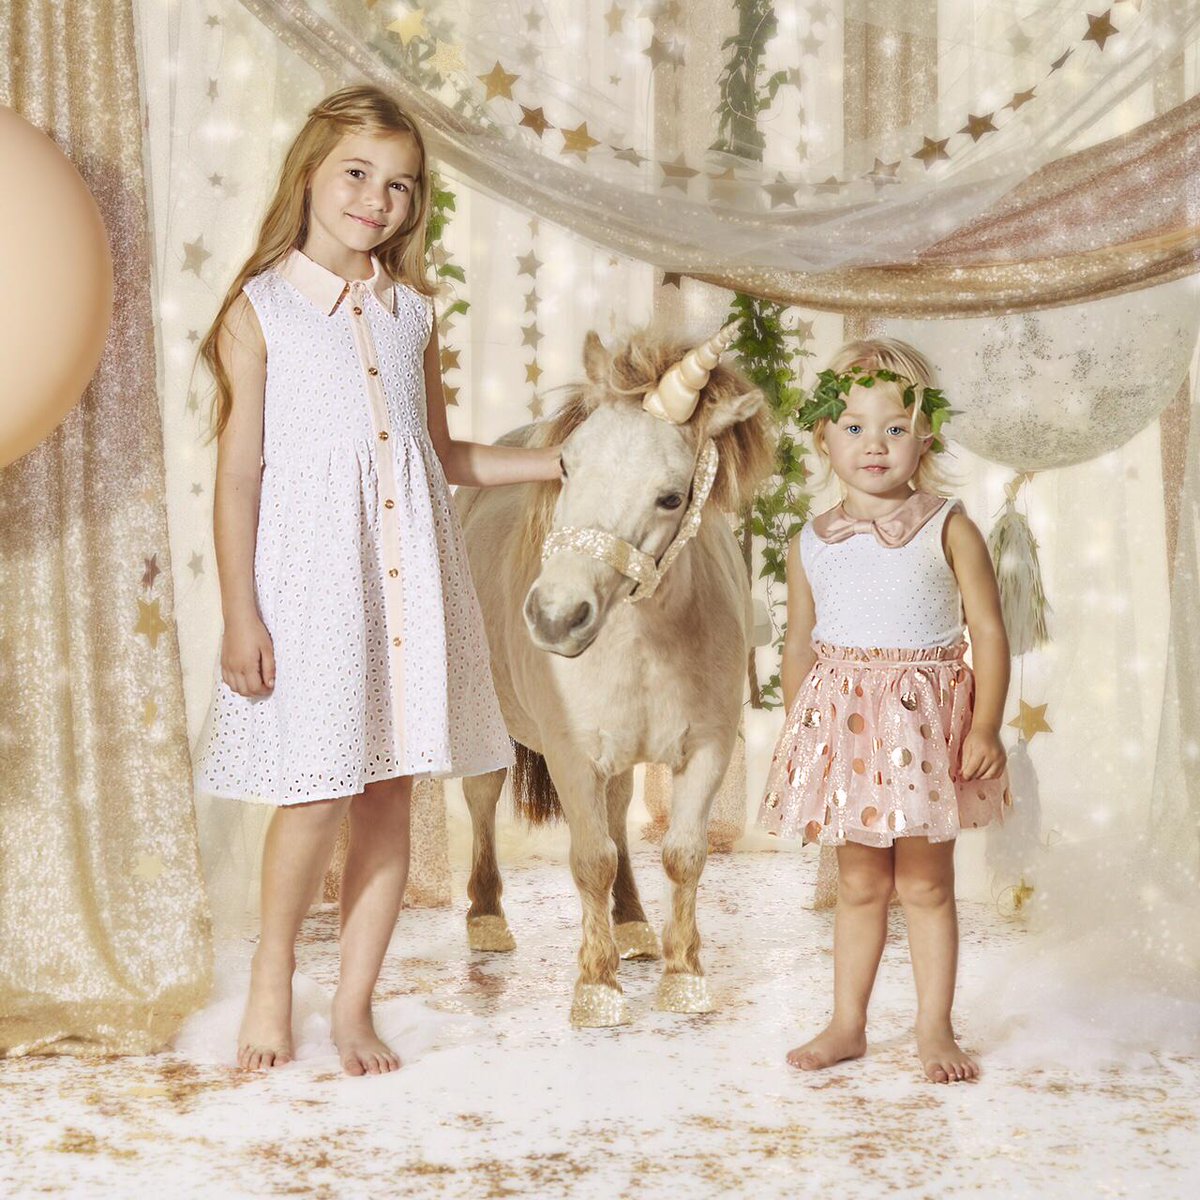 Our @kardashiankids collection has arrived at BIG W Australia!! In stores and online!! http://t.co/etiR2NZnPp http://t.co/QwIKNzonel